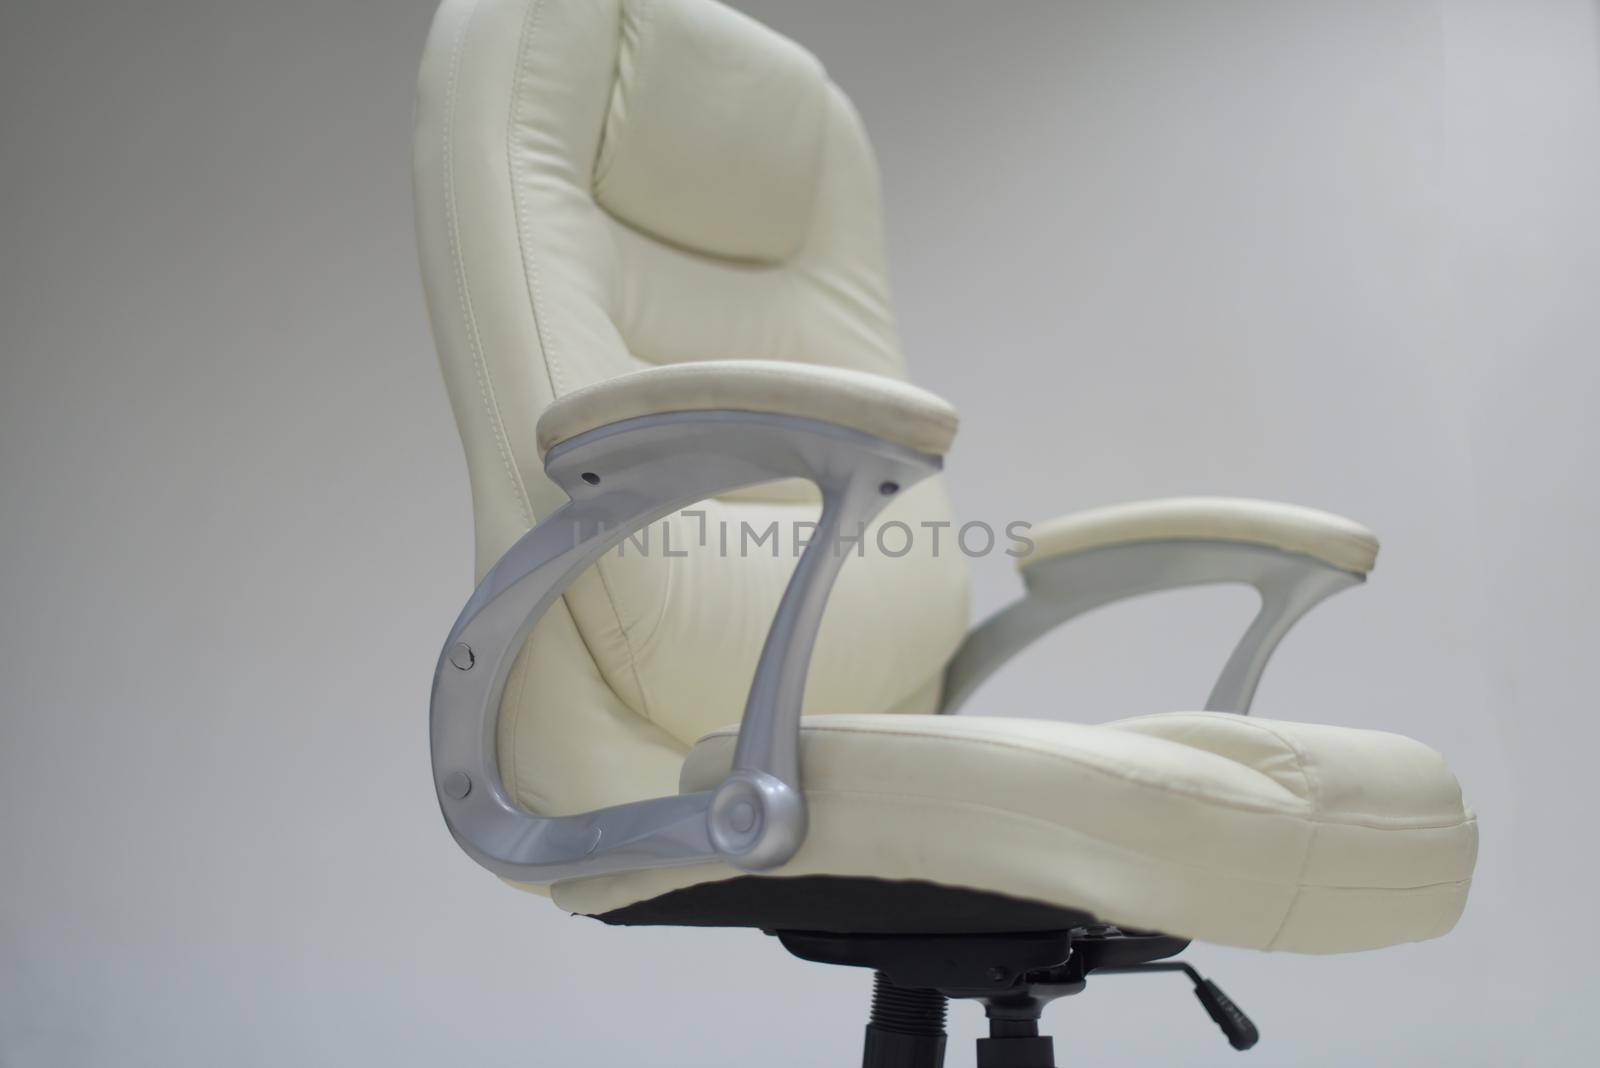 white office chair by dotshock